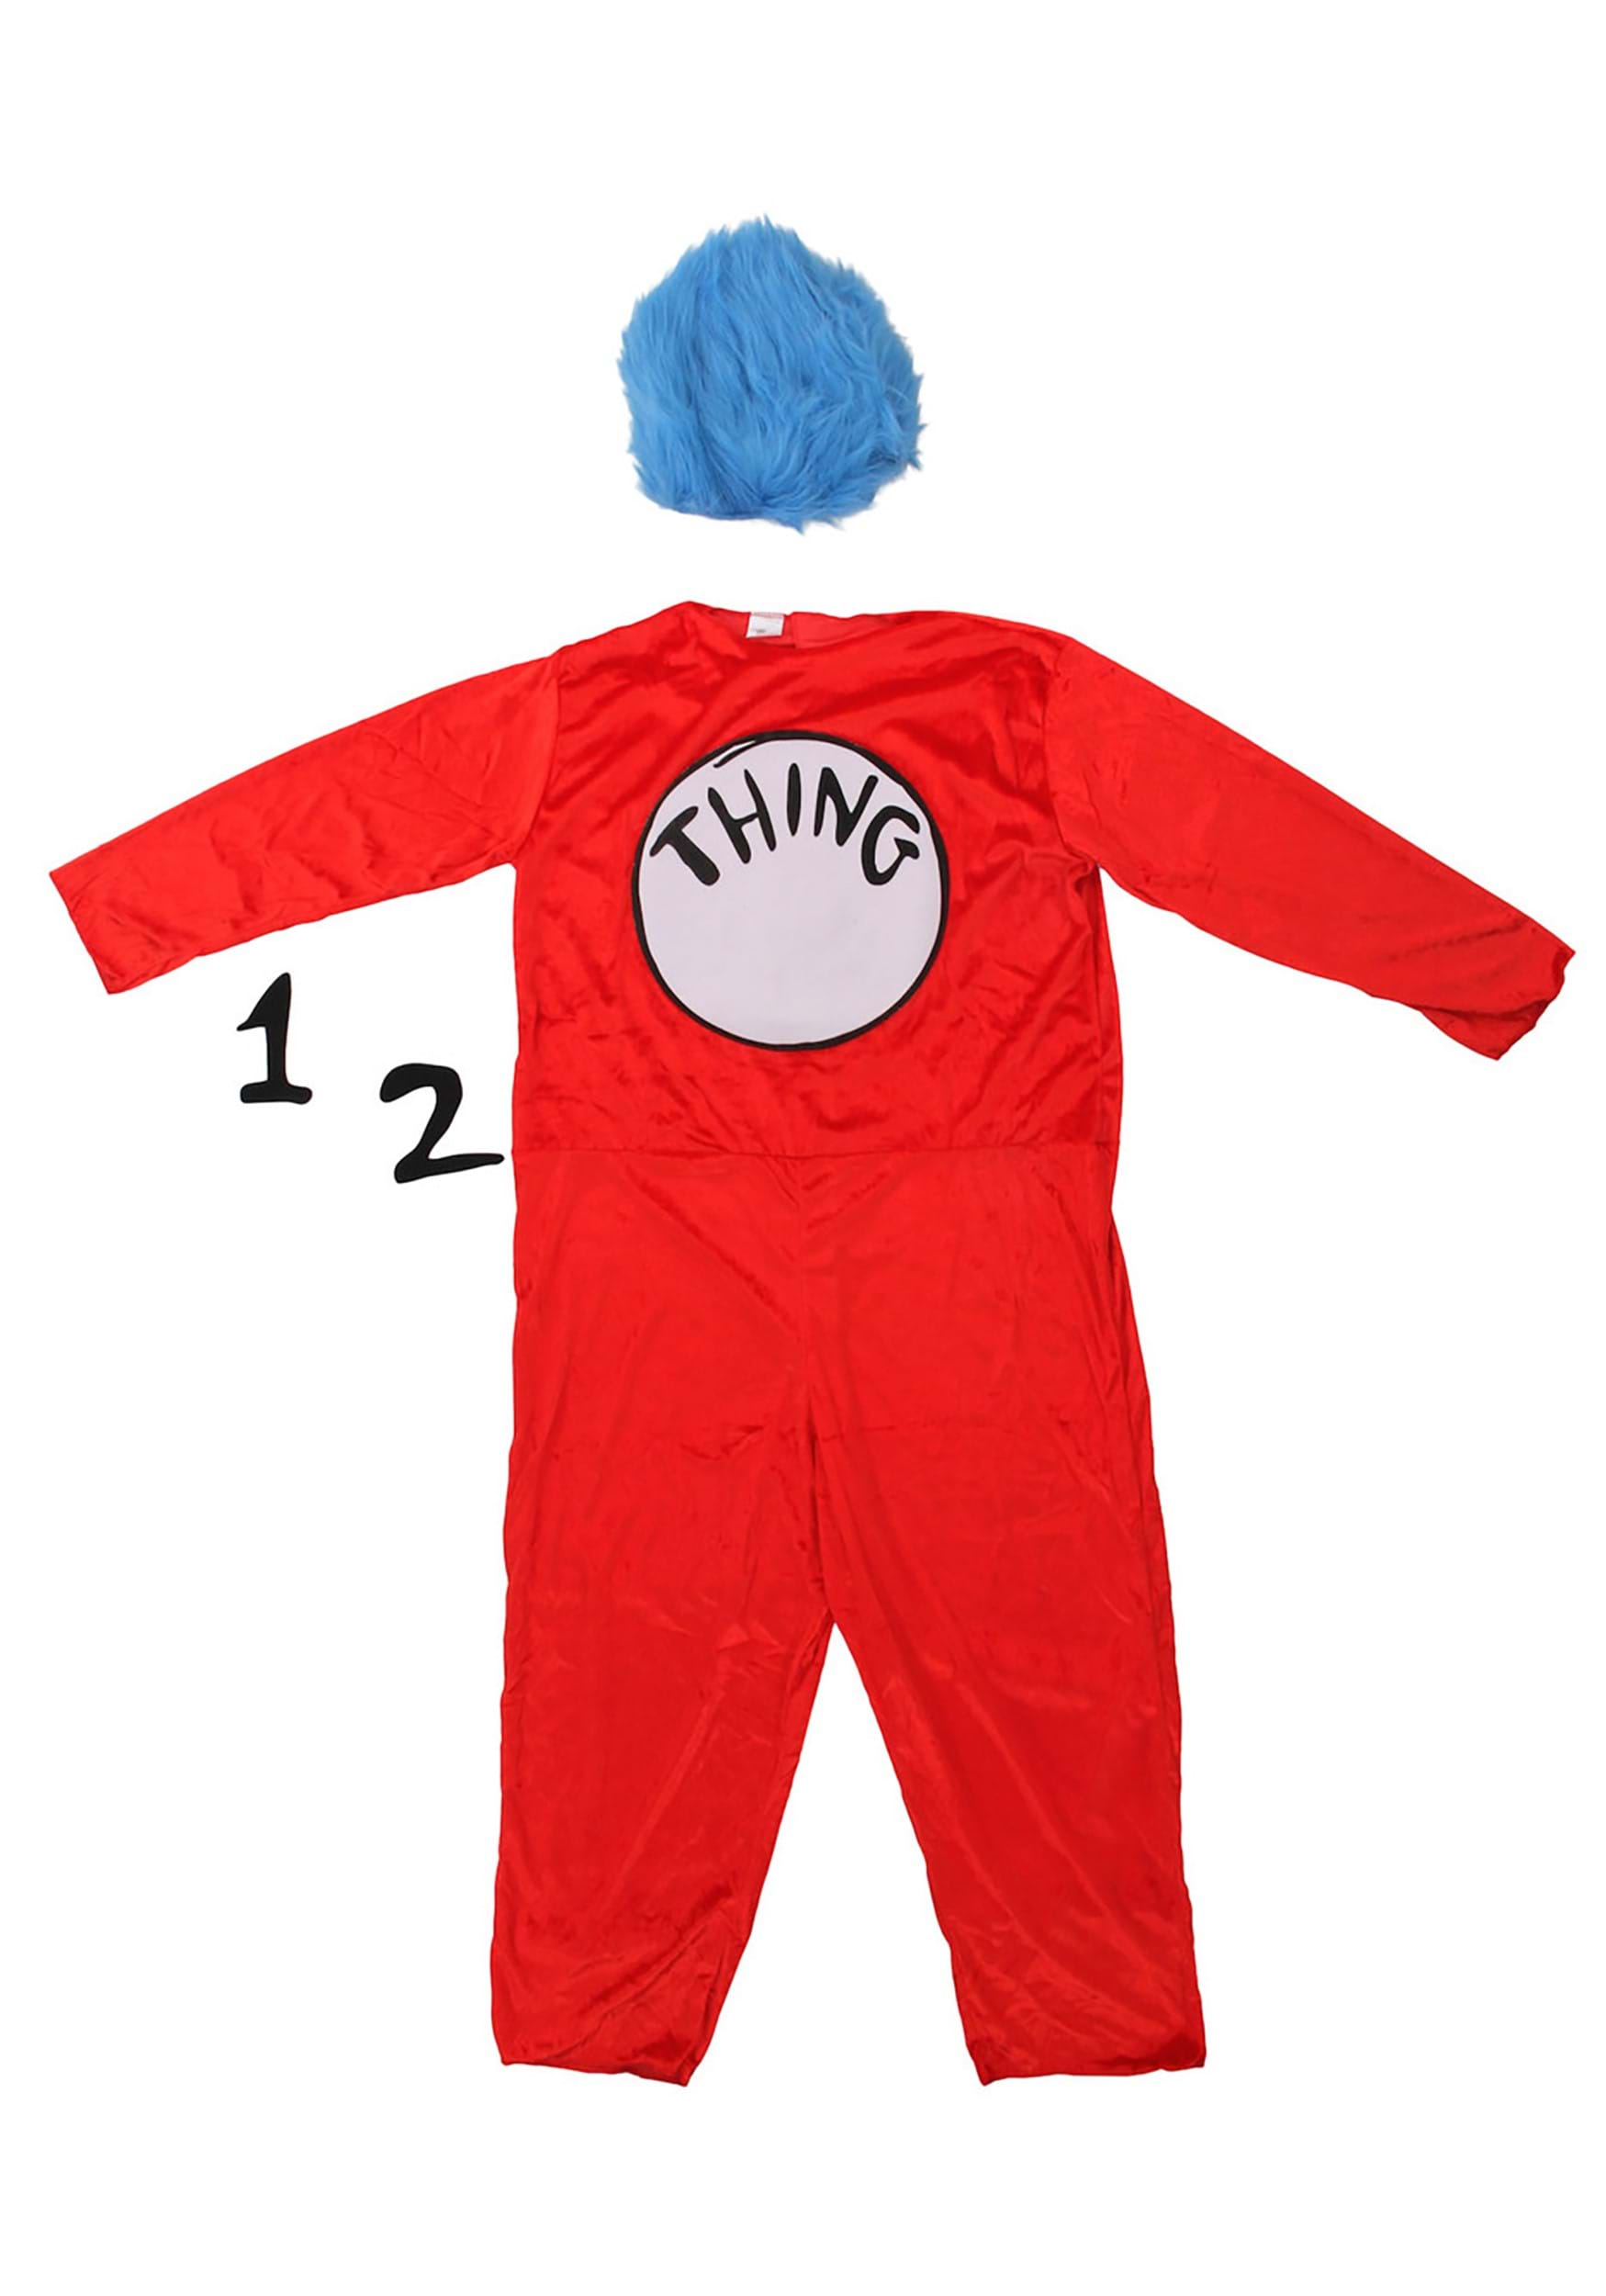 Thing One And Thing Two Plus Size Halloween Costume 9038